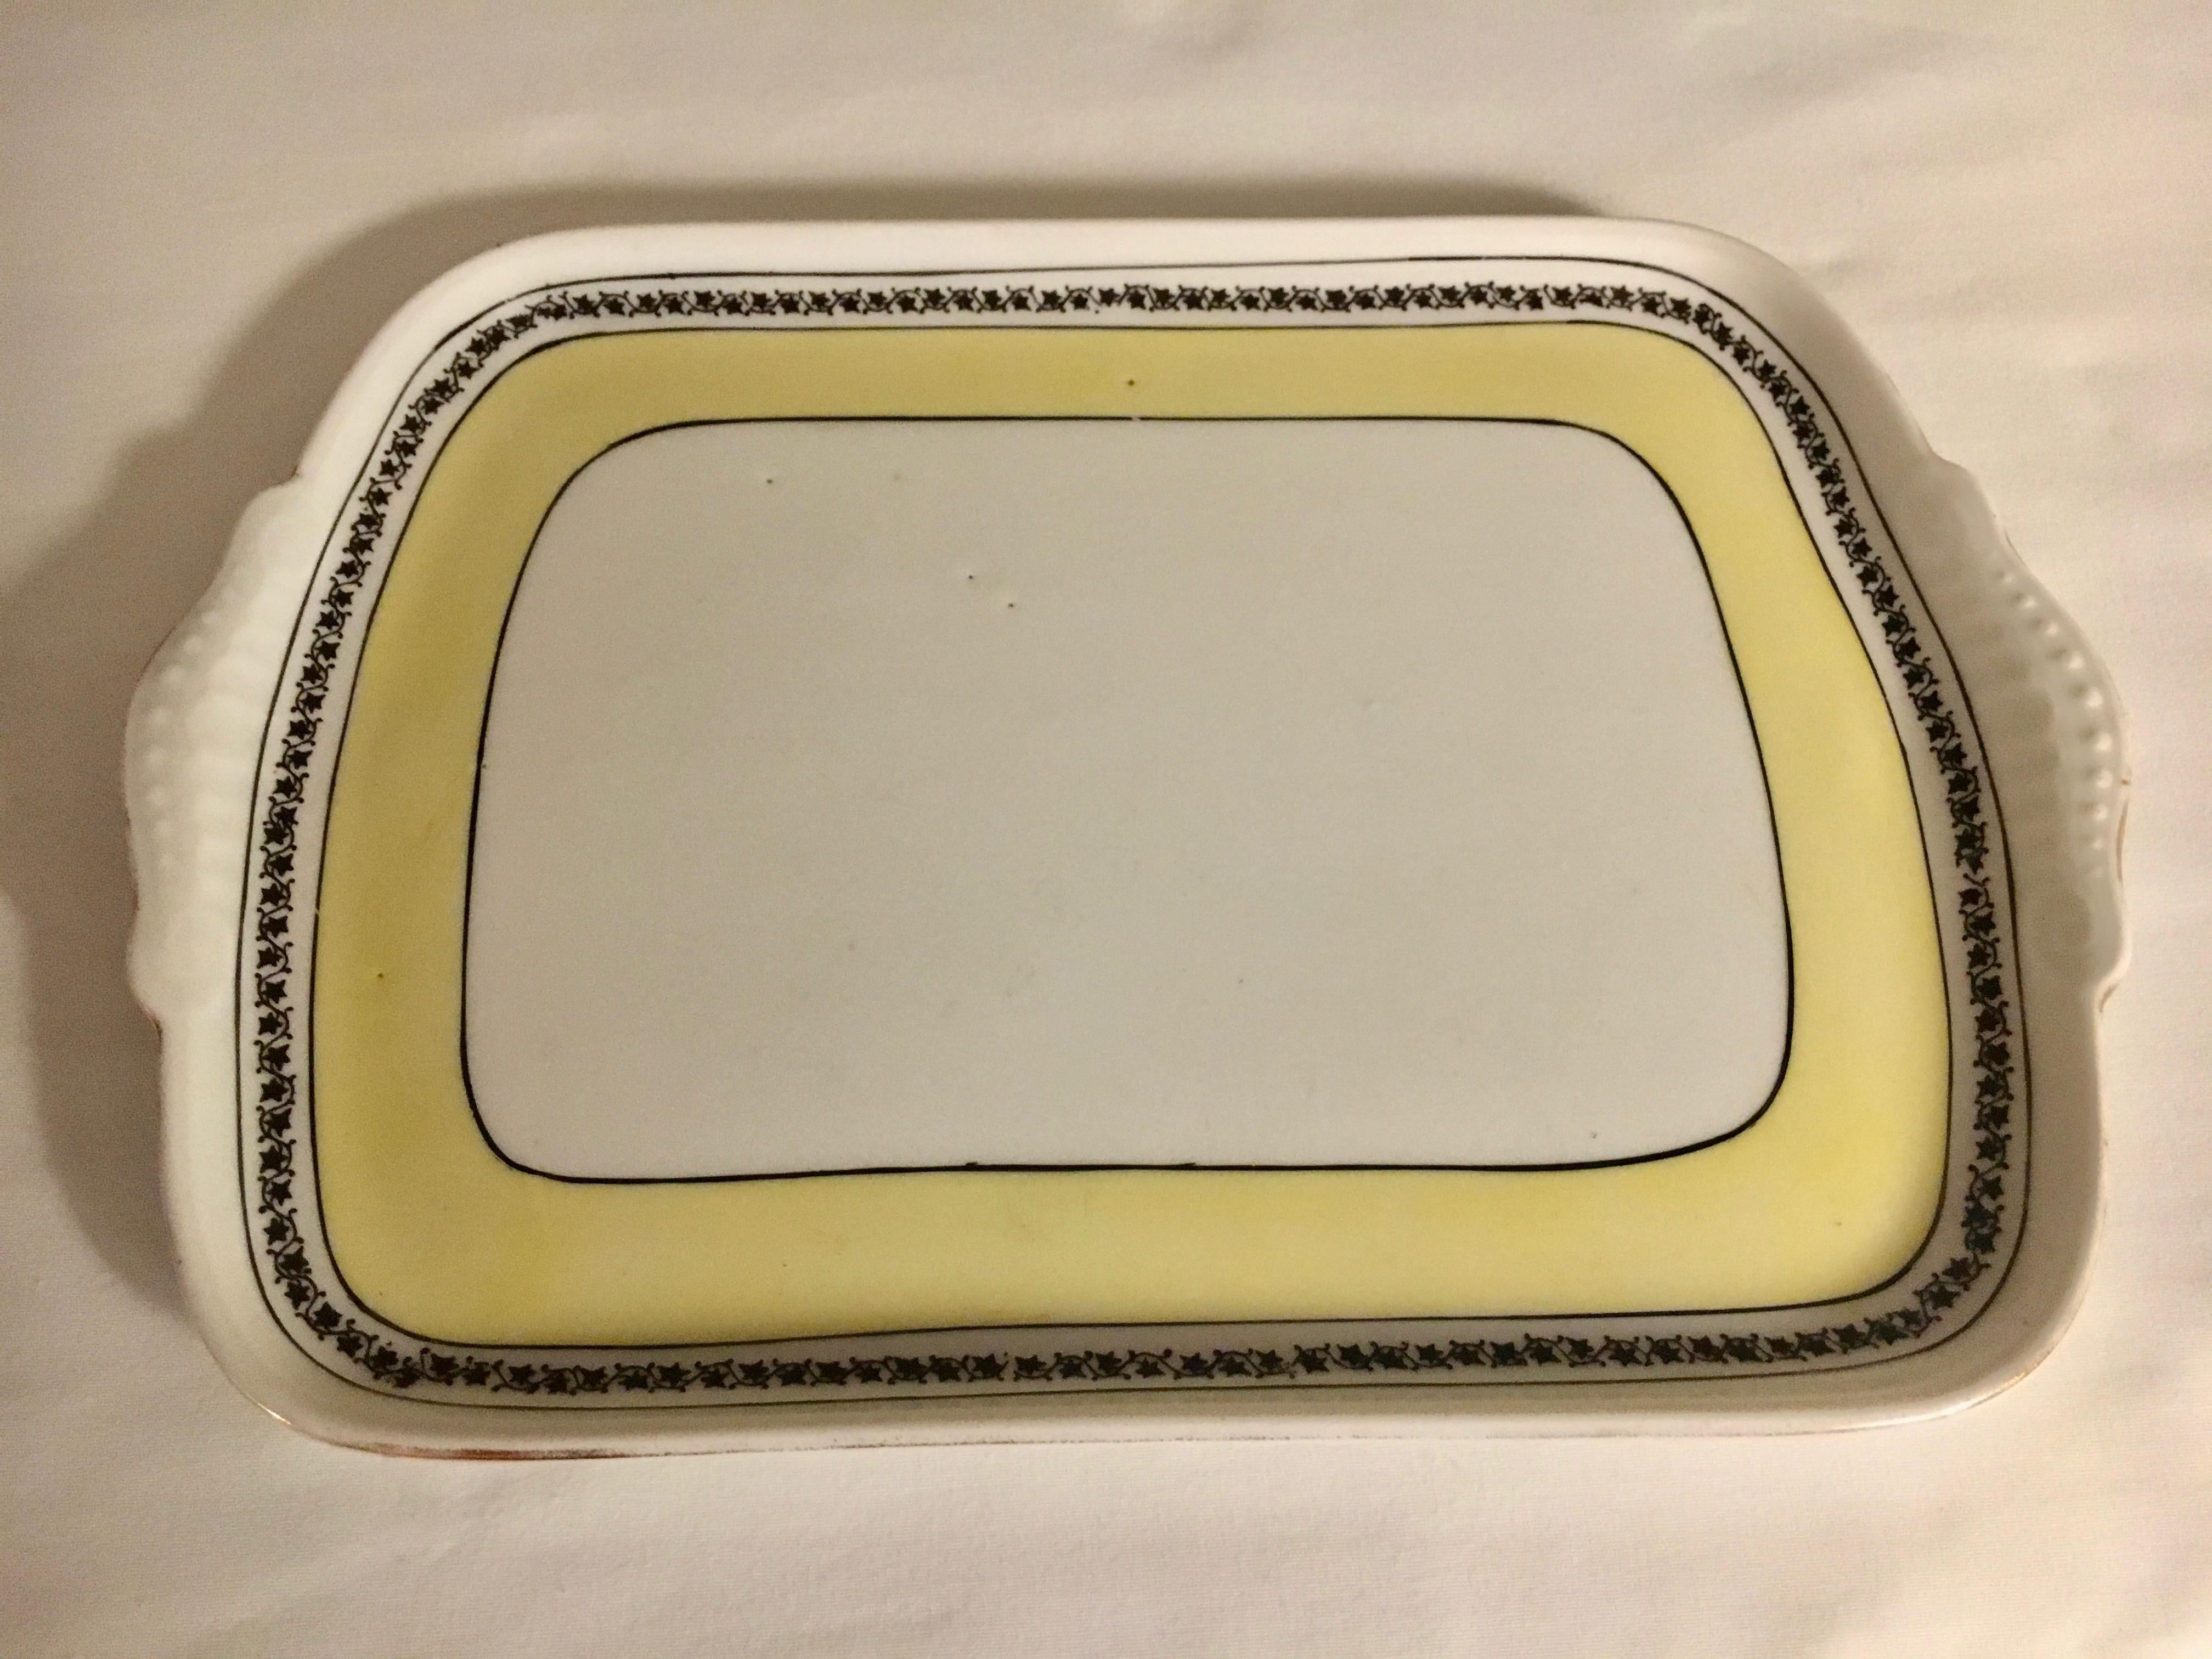 Union Bavaria porcelain tray and candlesticks - a lovely pair. Small tray and pair of candlesticks with beautiful yellow pattern rim - works with contemporary and traditional settings.

Measures: Candlesticks 3